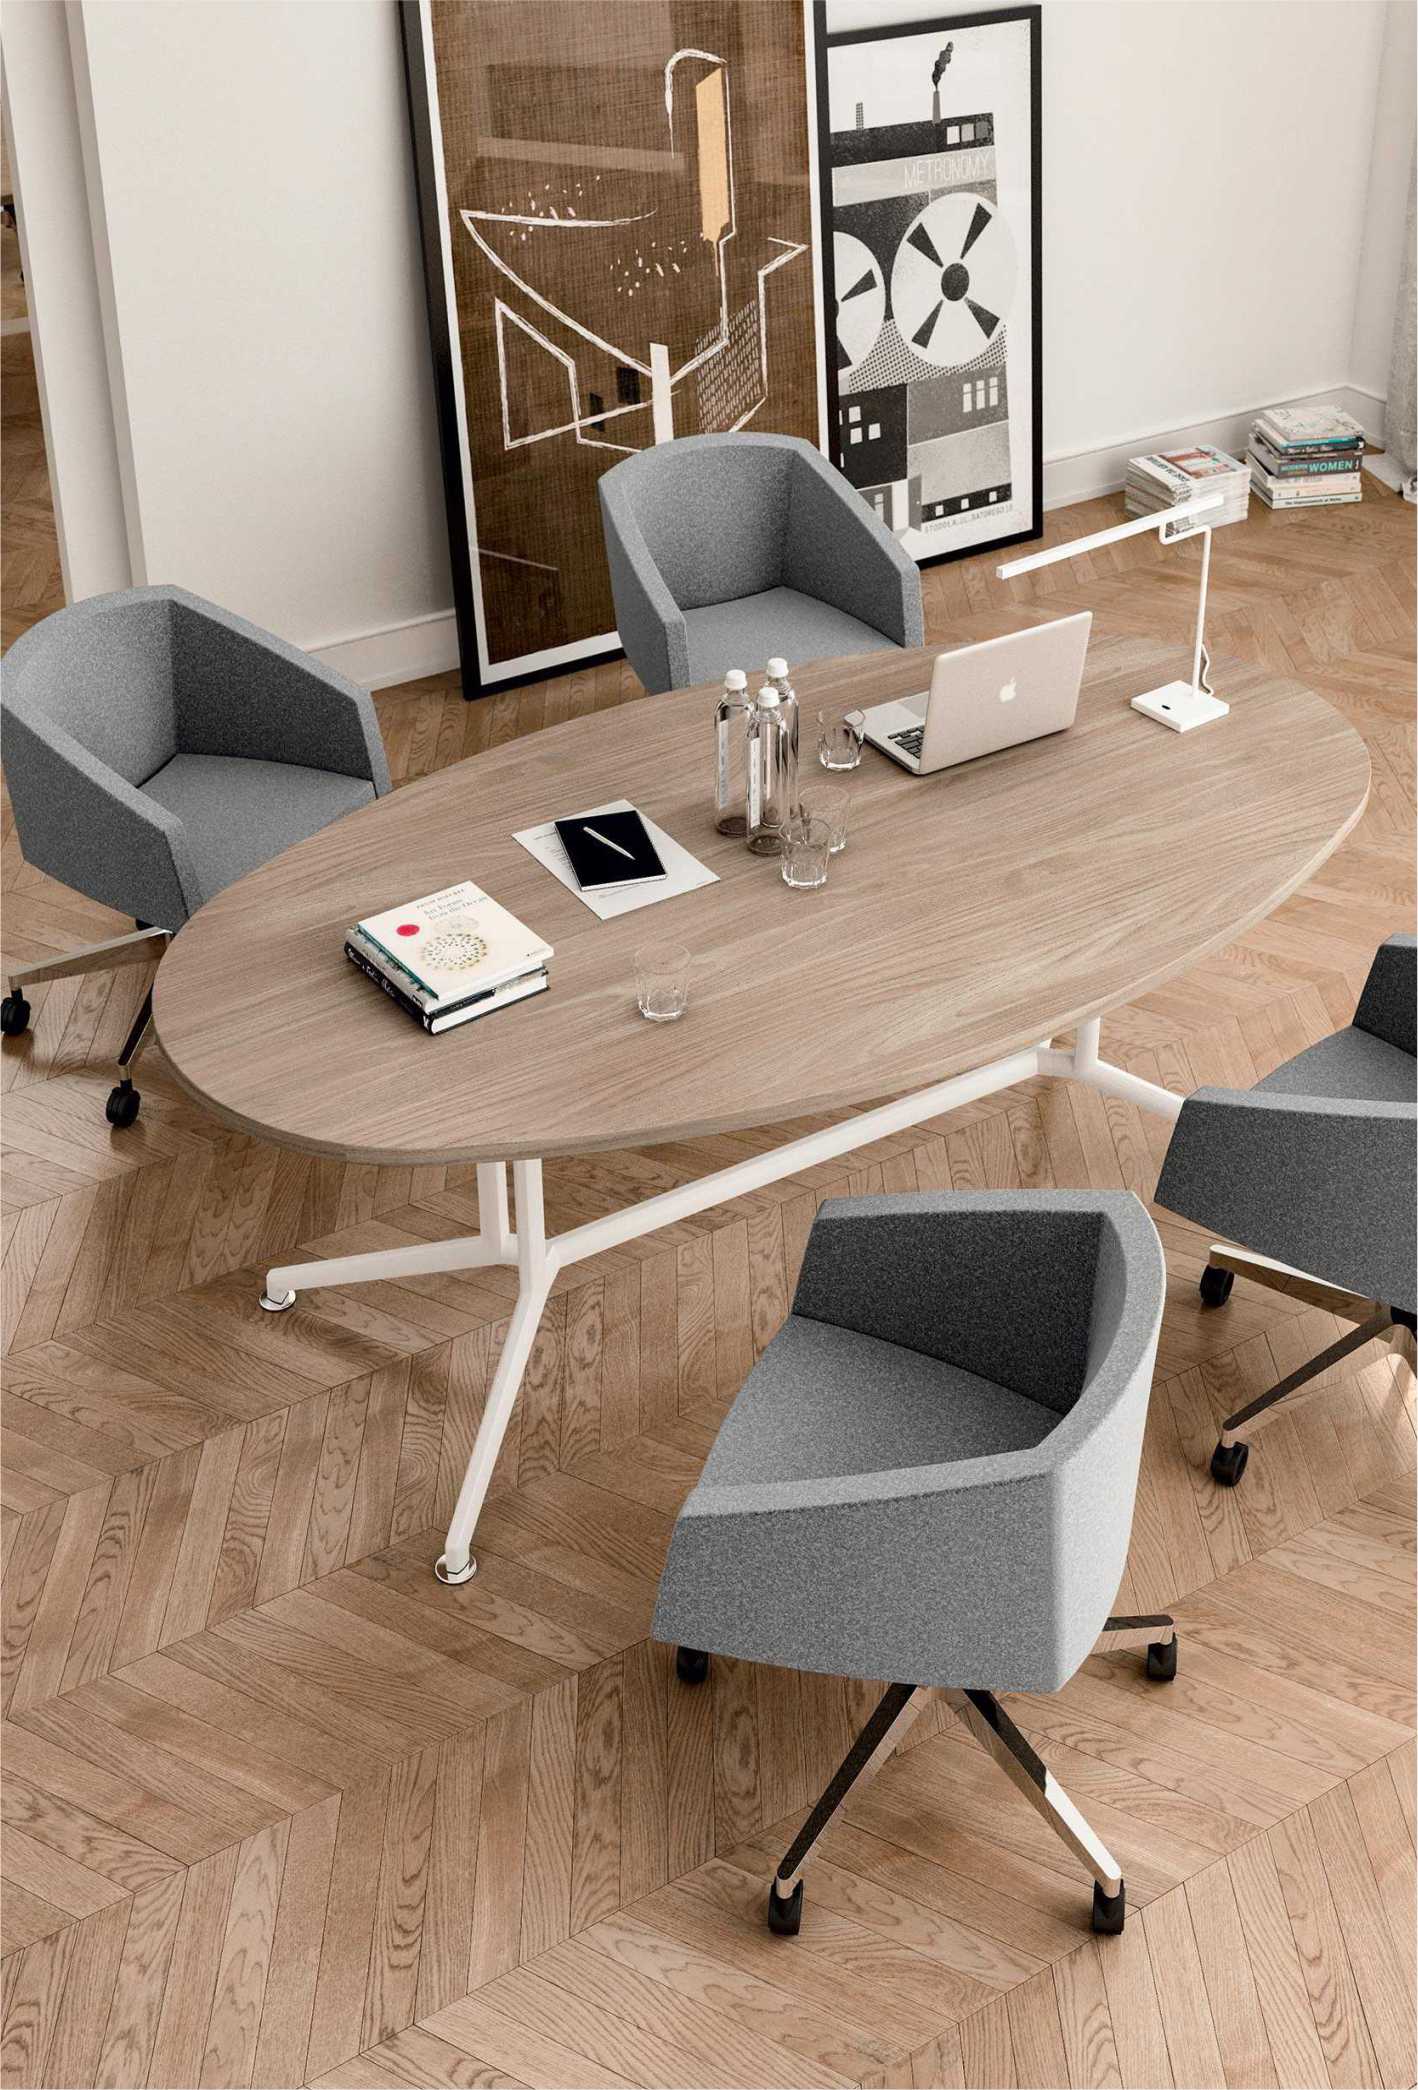 Meeting room table and chairs